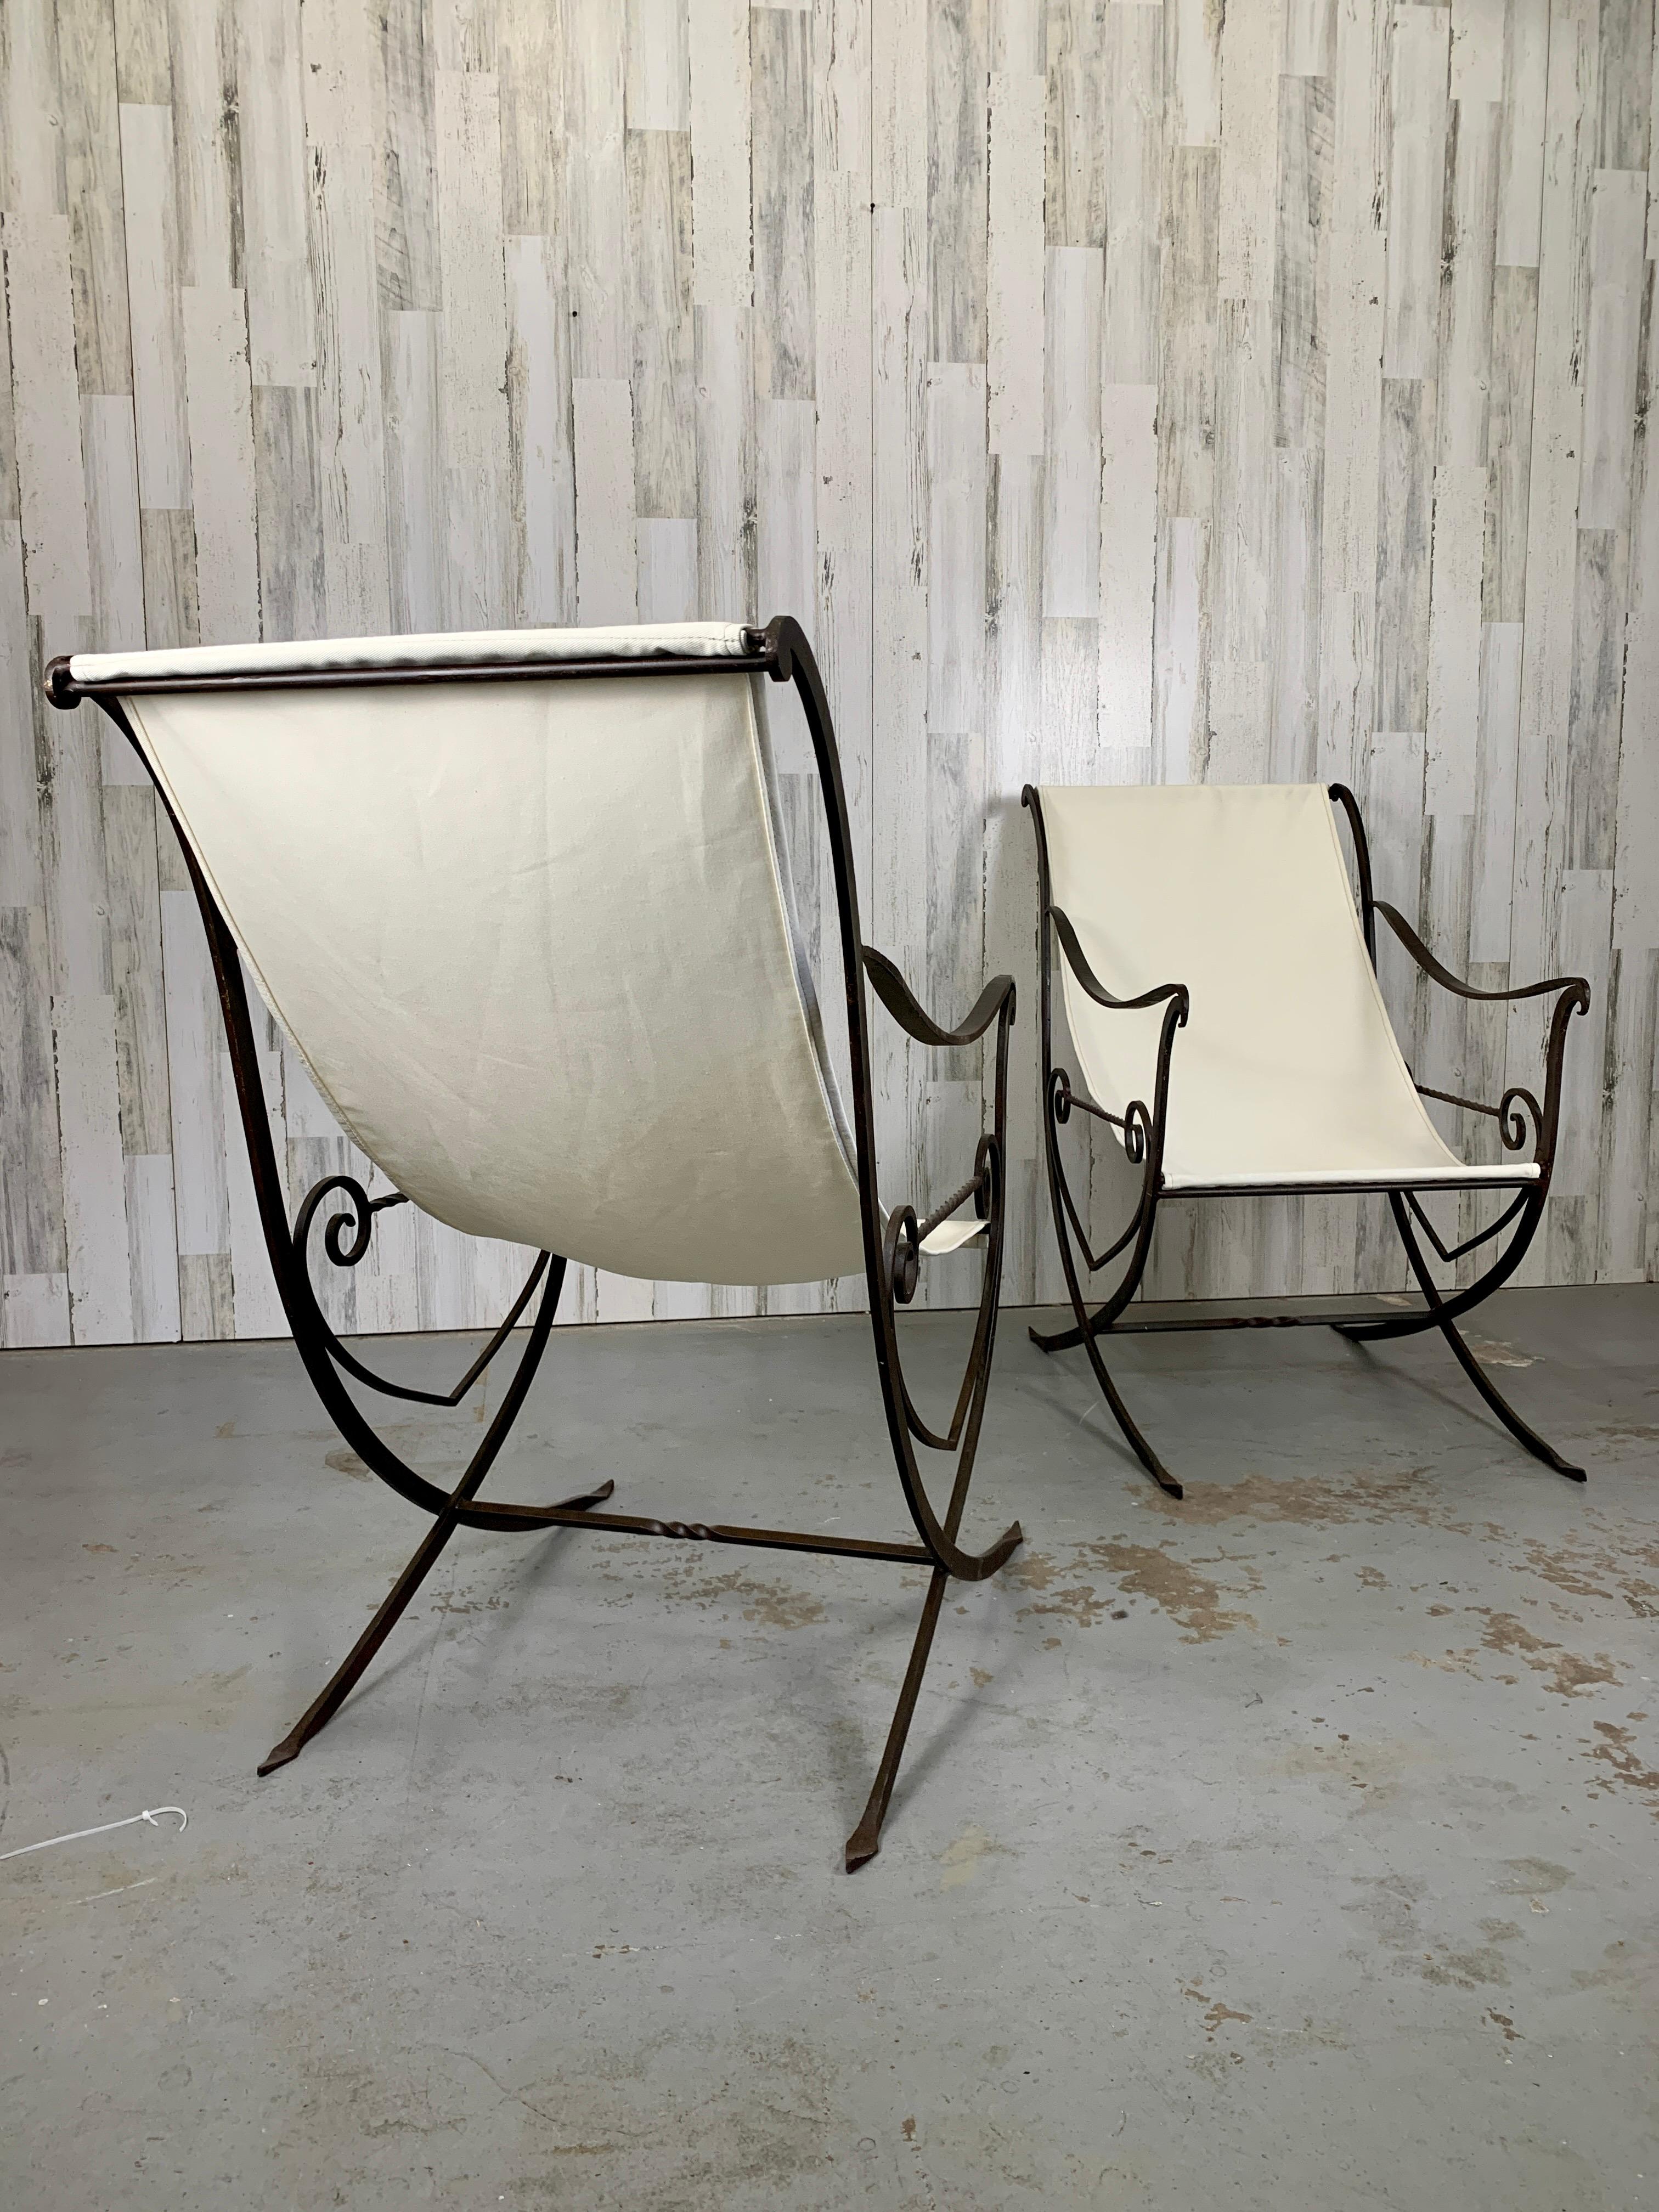 Sculpted Forged Iron Sling Chairs, 1940's For Sale 8